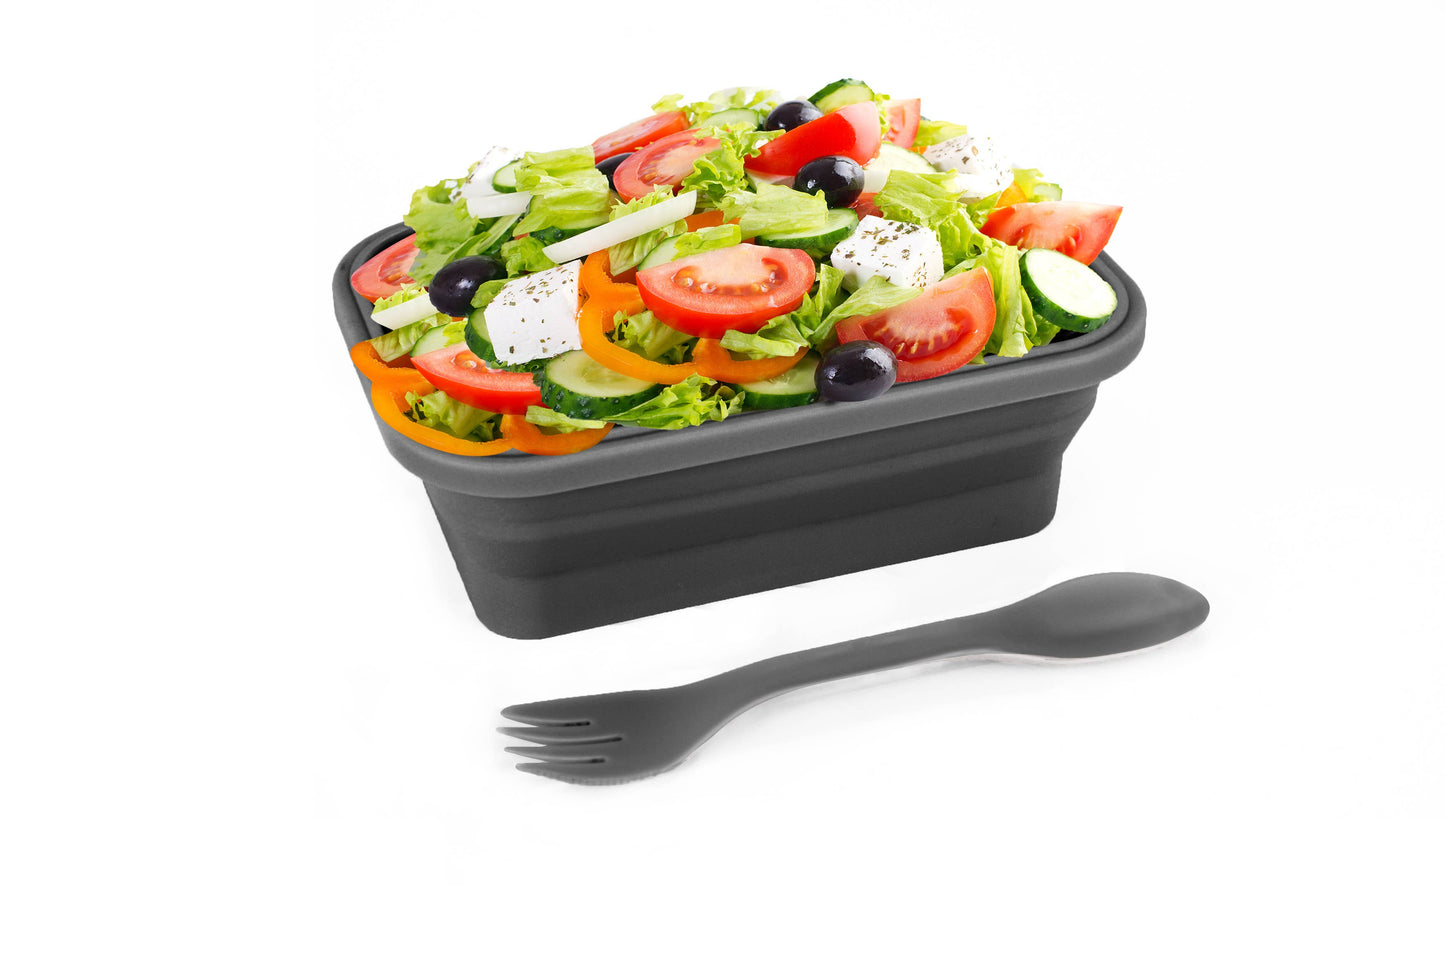 Krumbs Kitchen - Silicone Collapsible Lunch Container